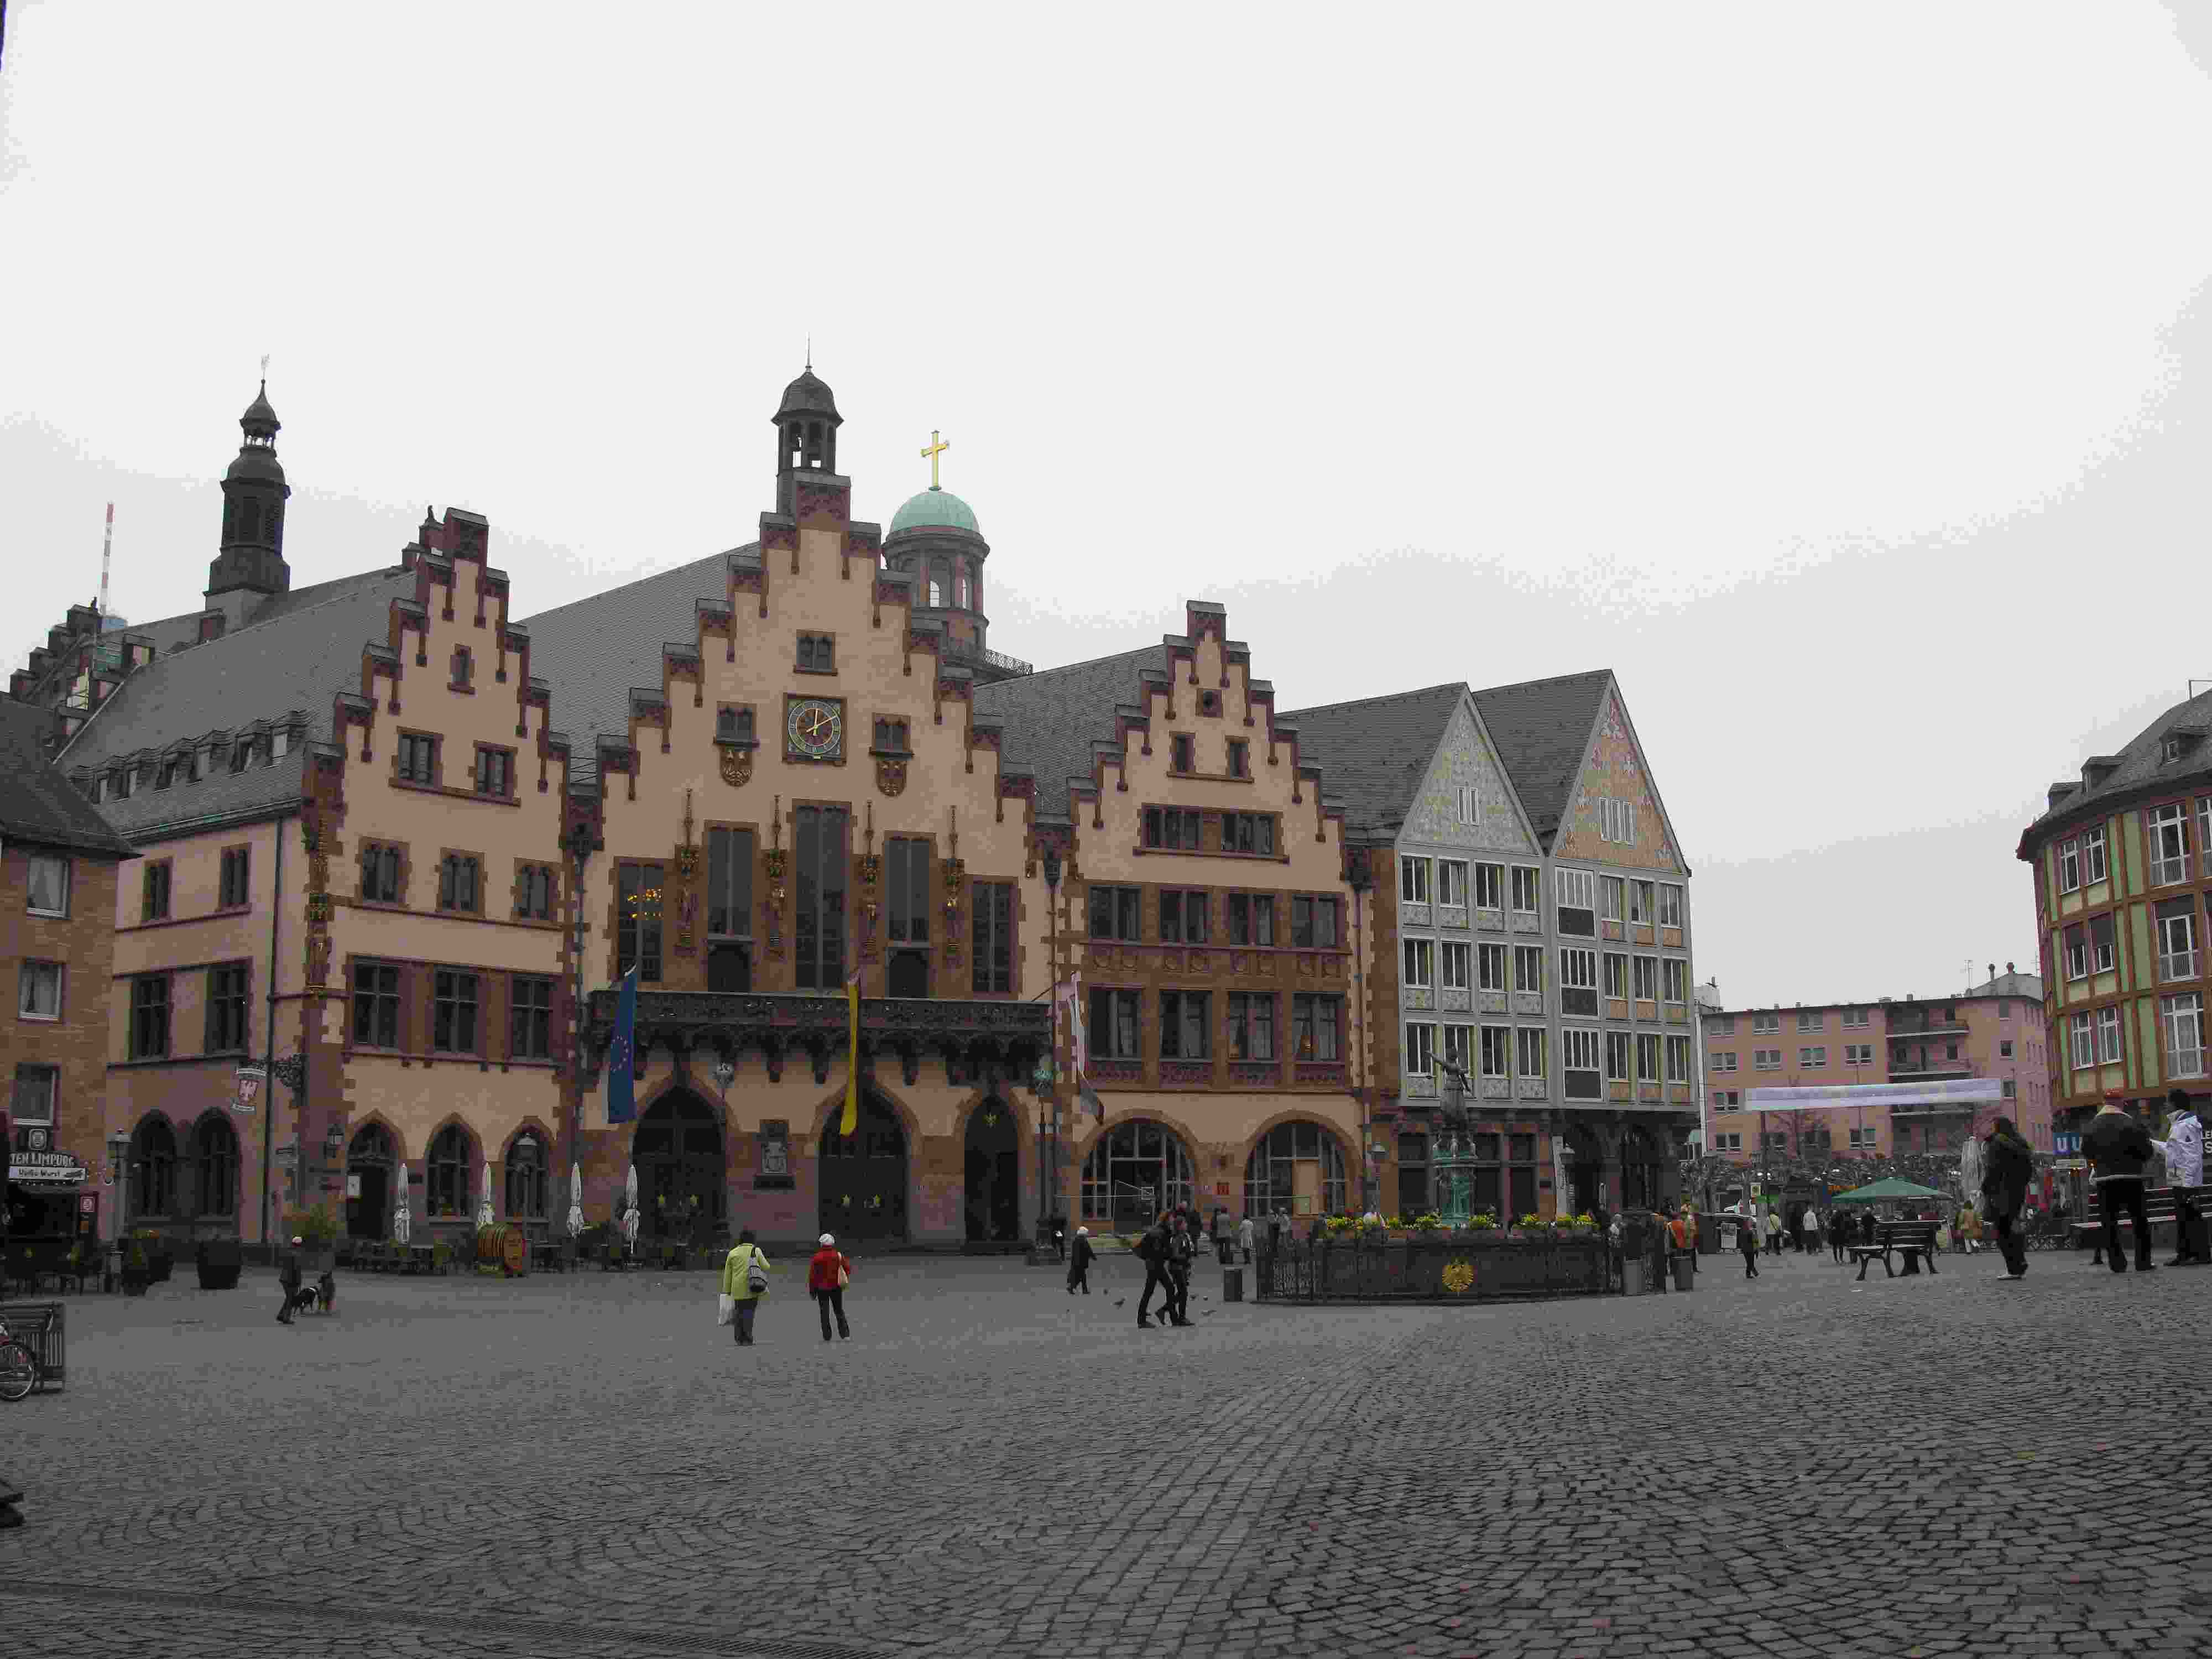 The ancient central square in Frankfurt